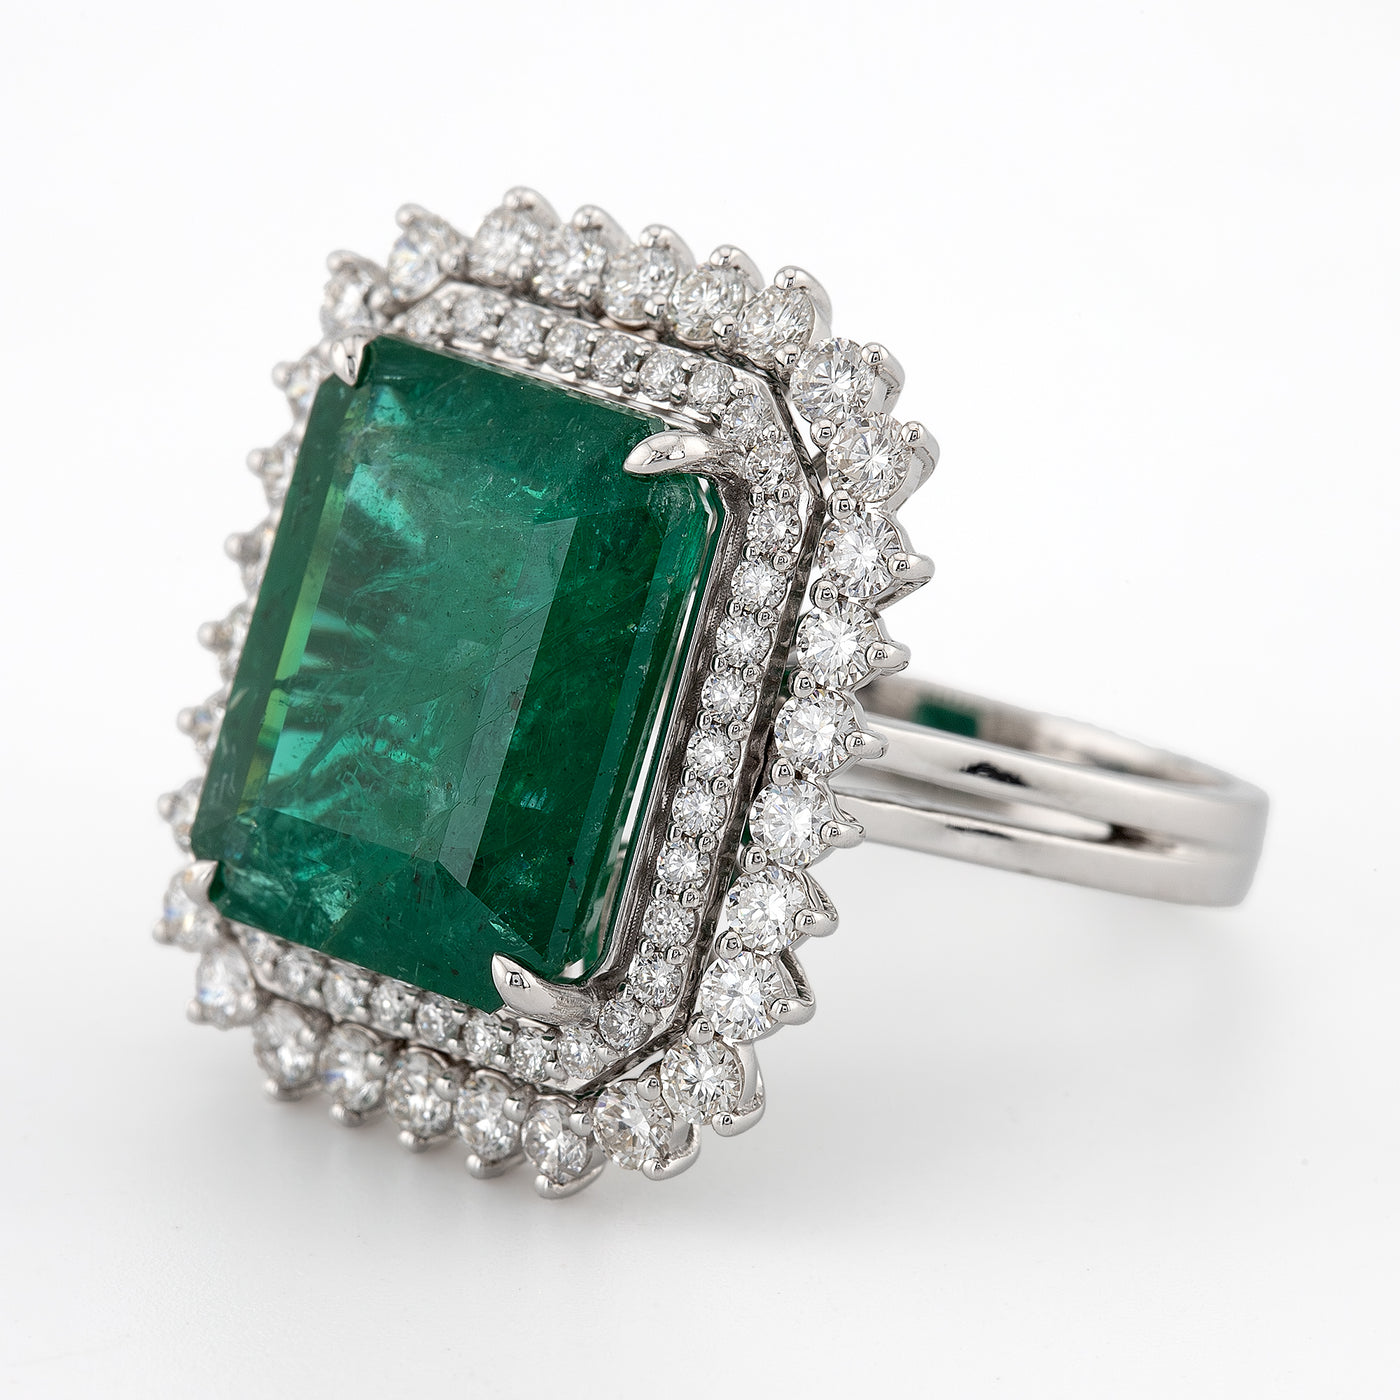 Emerald shaped green emerald color with white diamond halo setting engagement ring